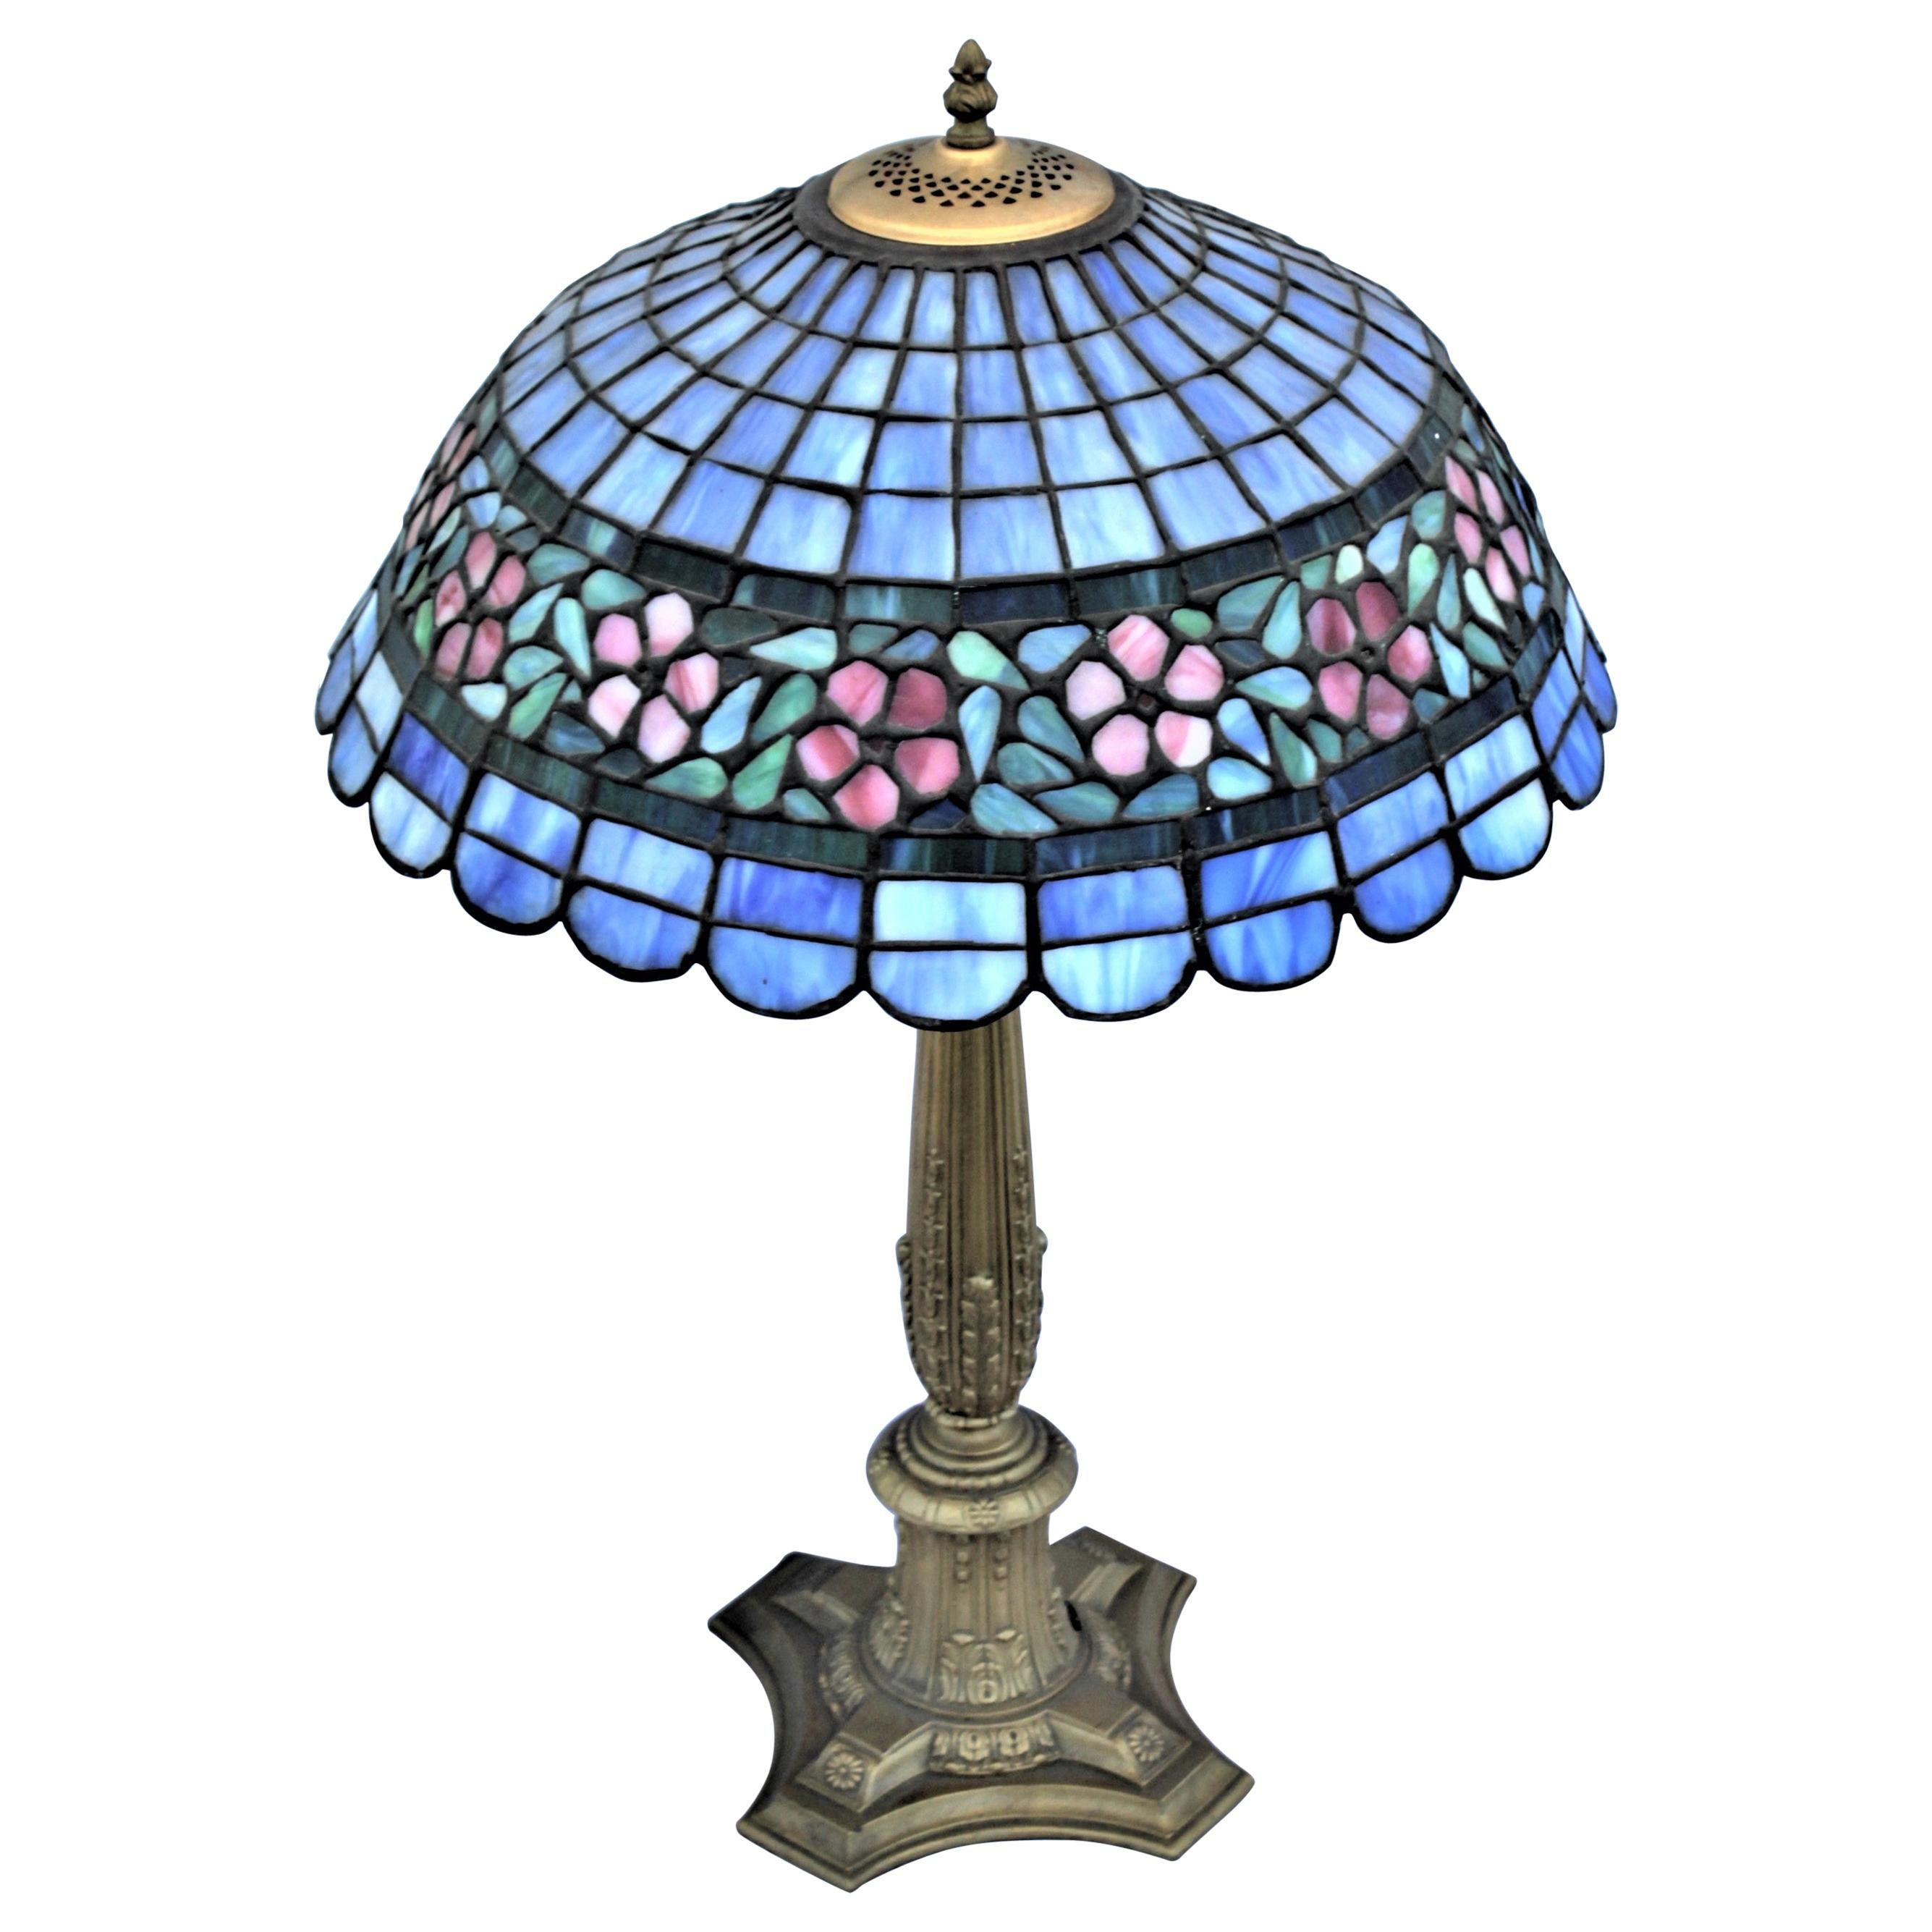 Early American Art Glass Foil Shade Lamp, Blue with Red Flowers Antique Base